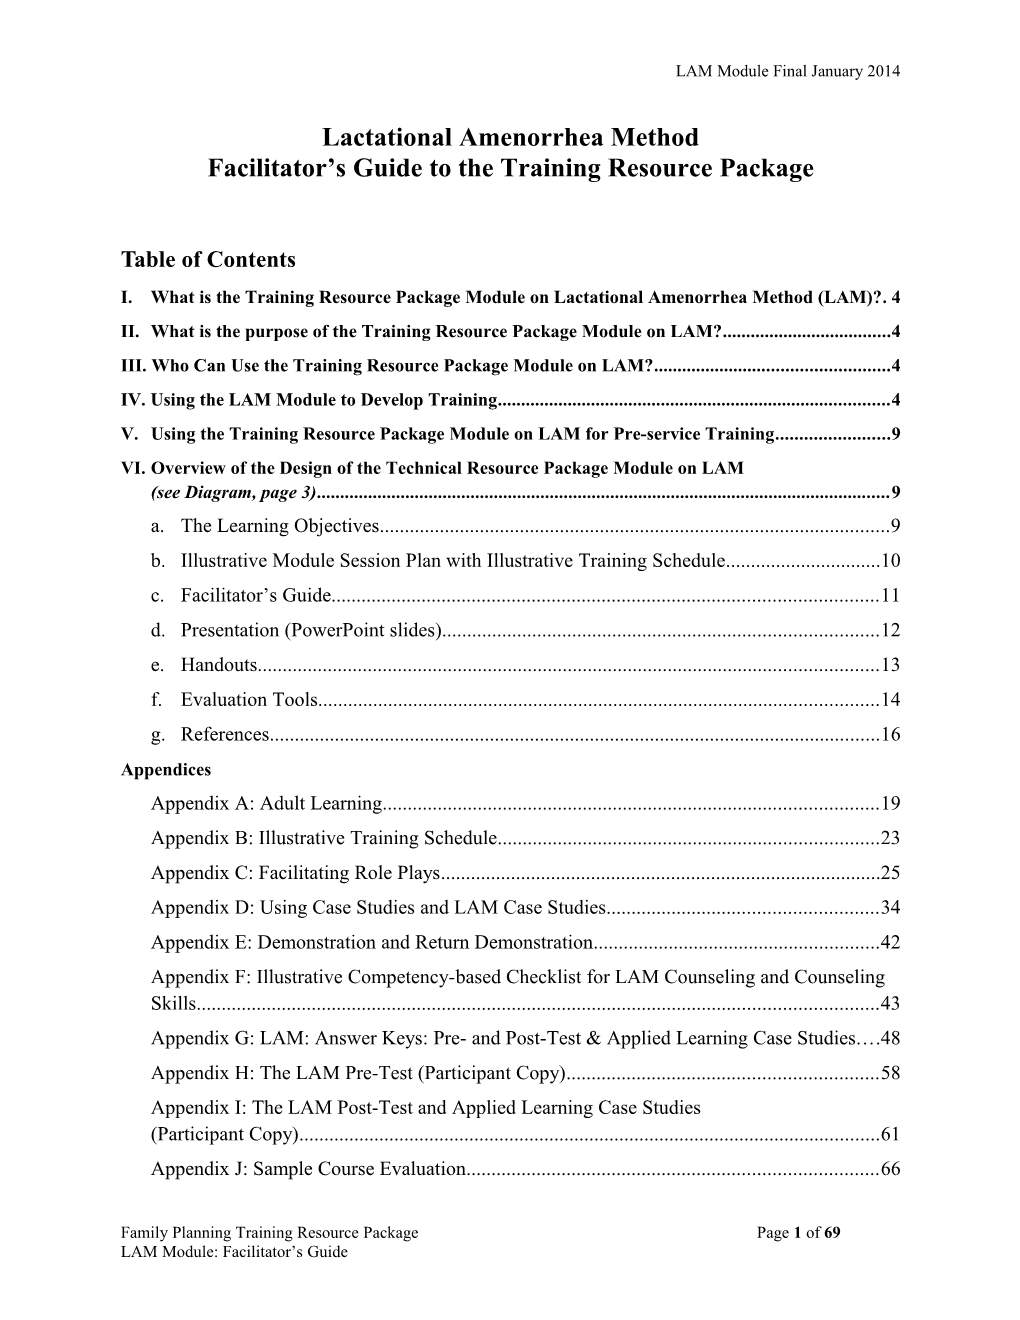 Facilitator S Guide to the Training Resource Package